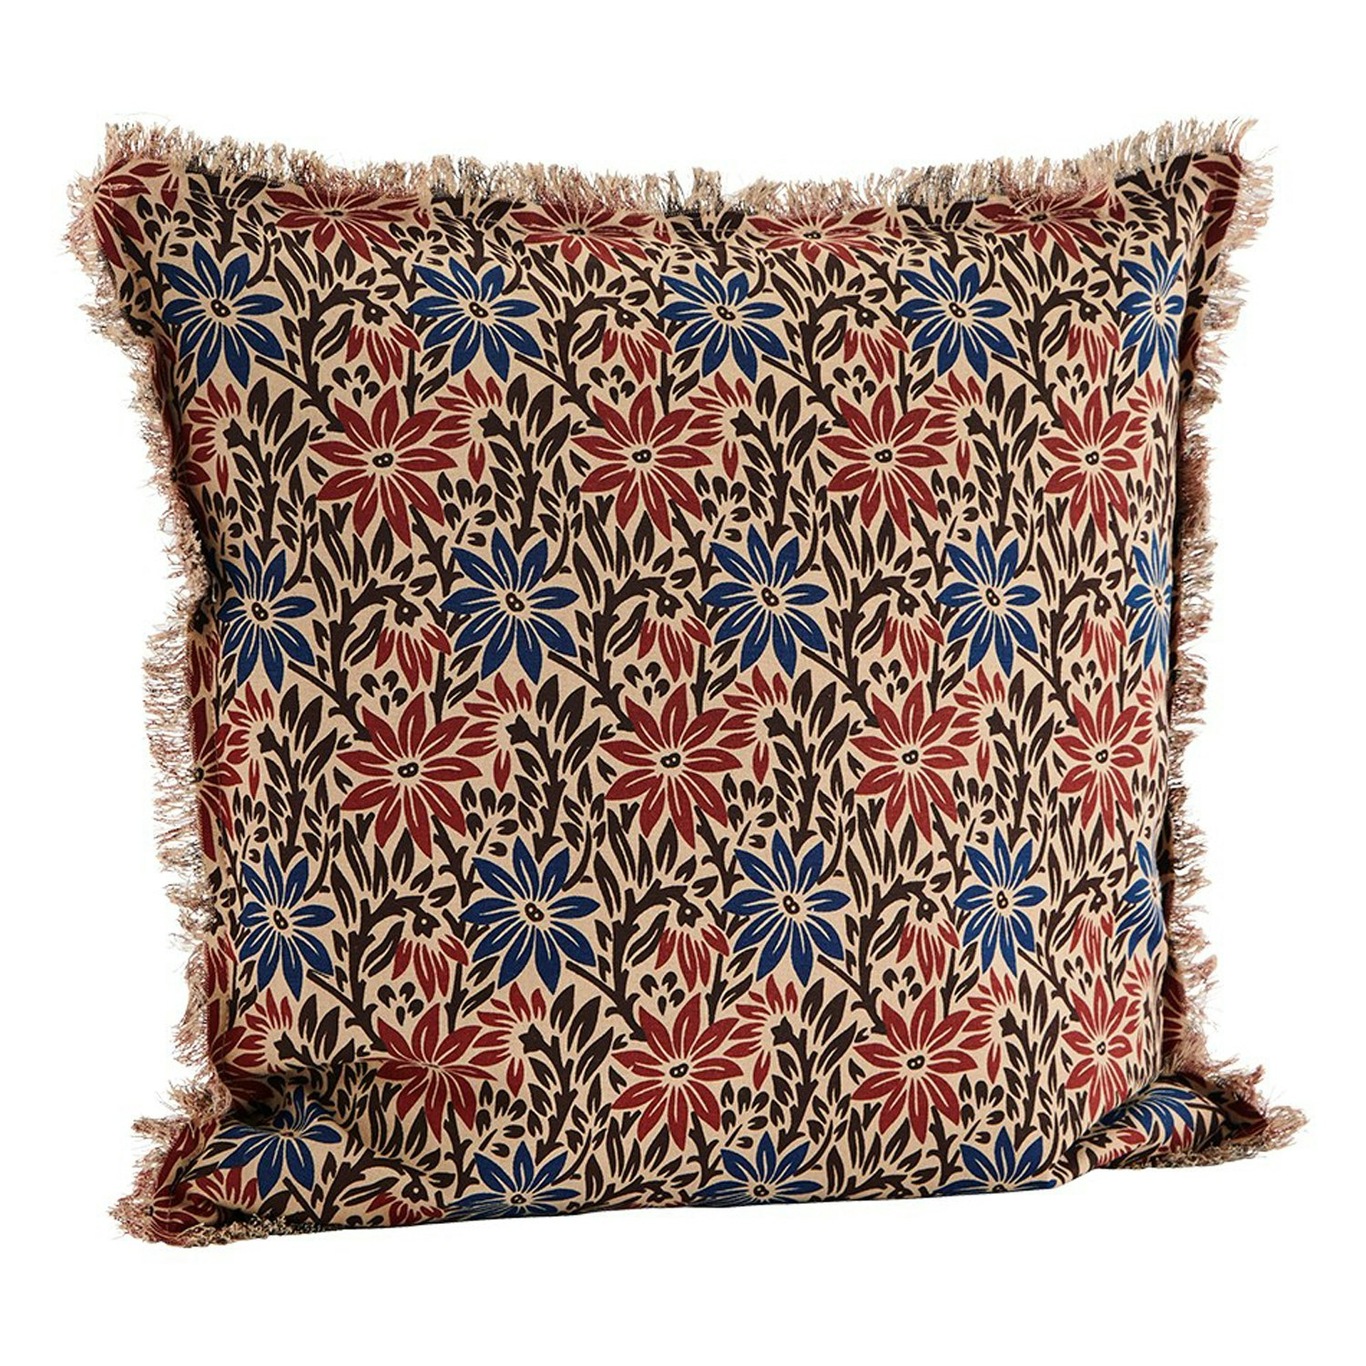 Cushion Cover With Fringes 50x50 cm, Beige/Multi